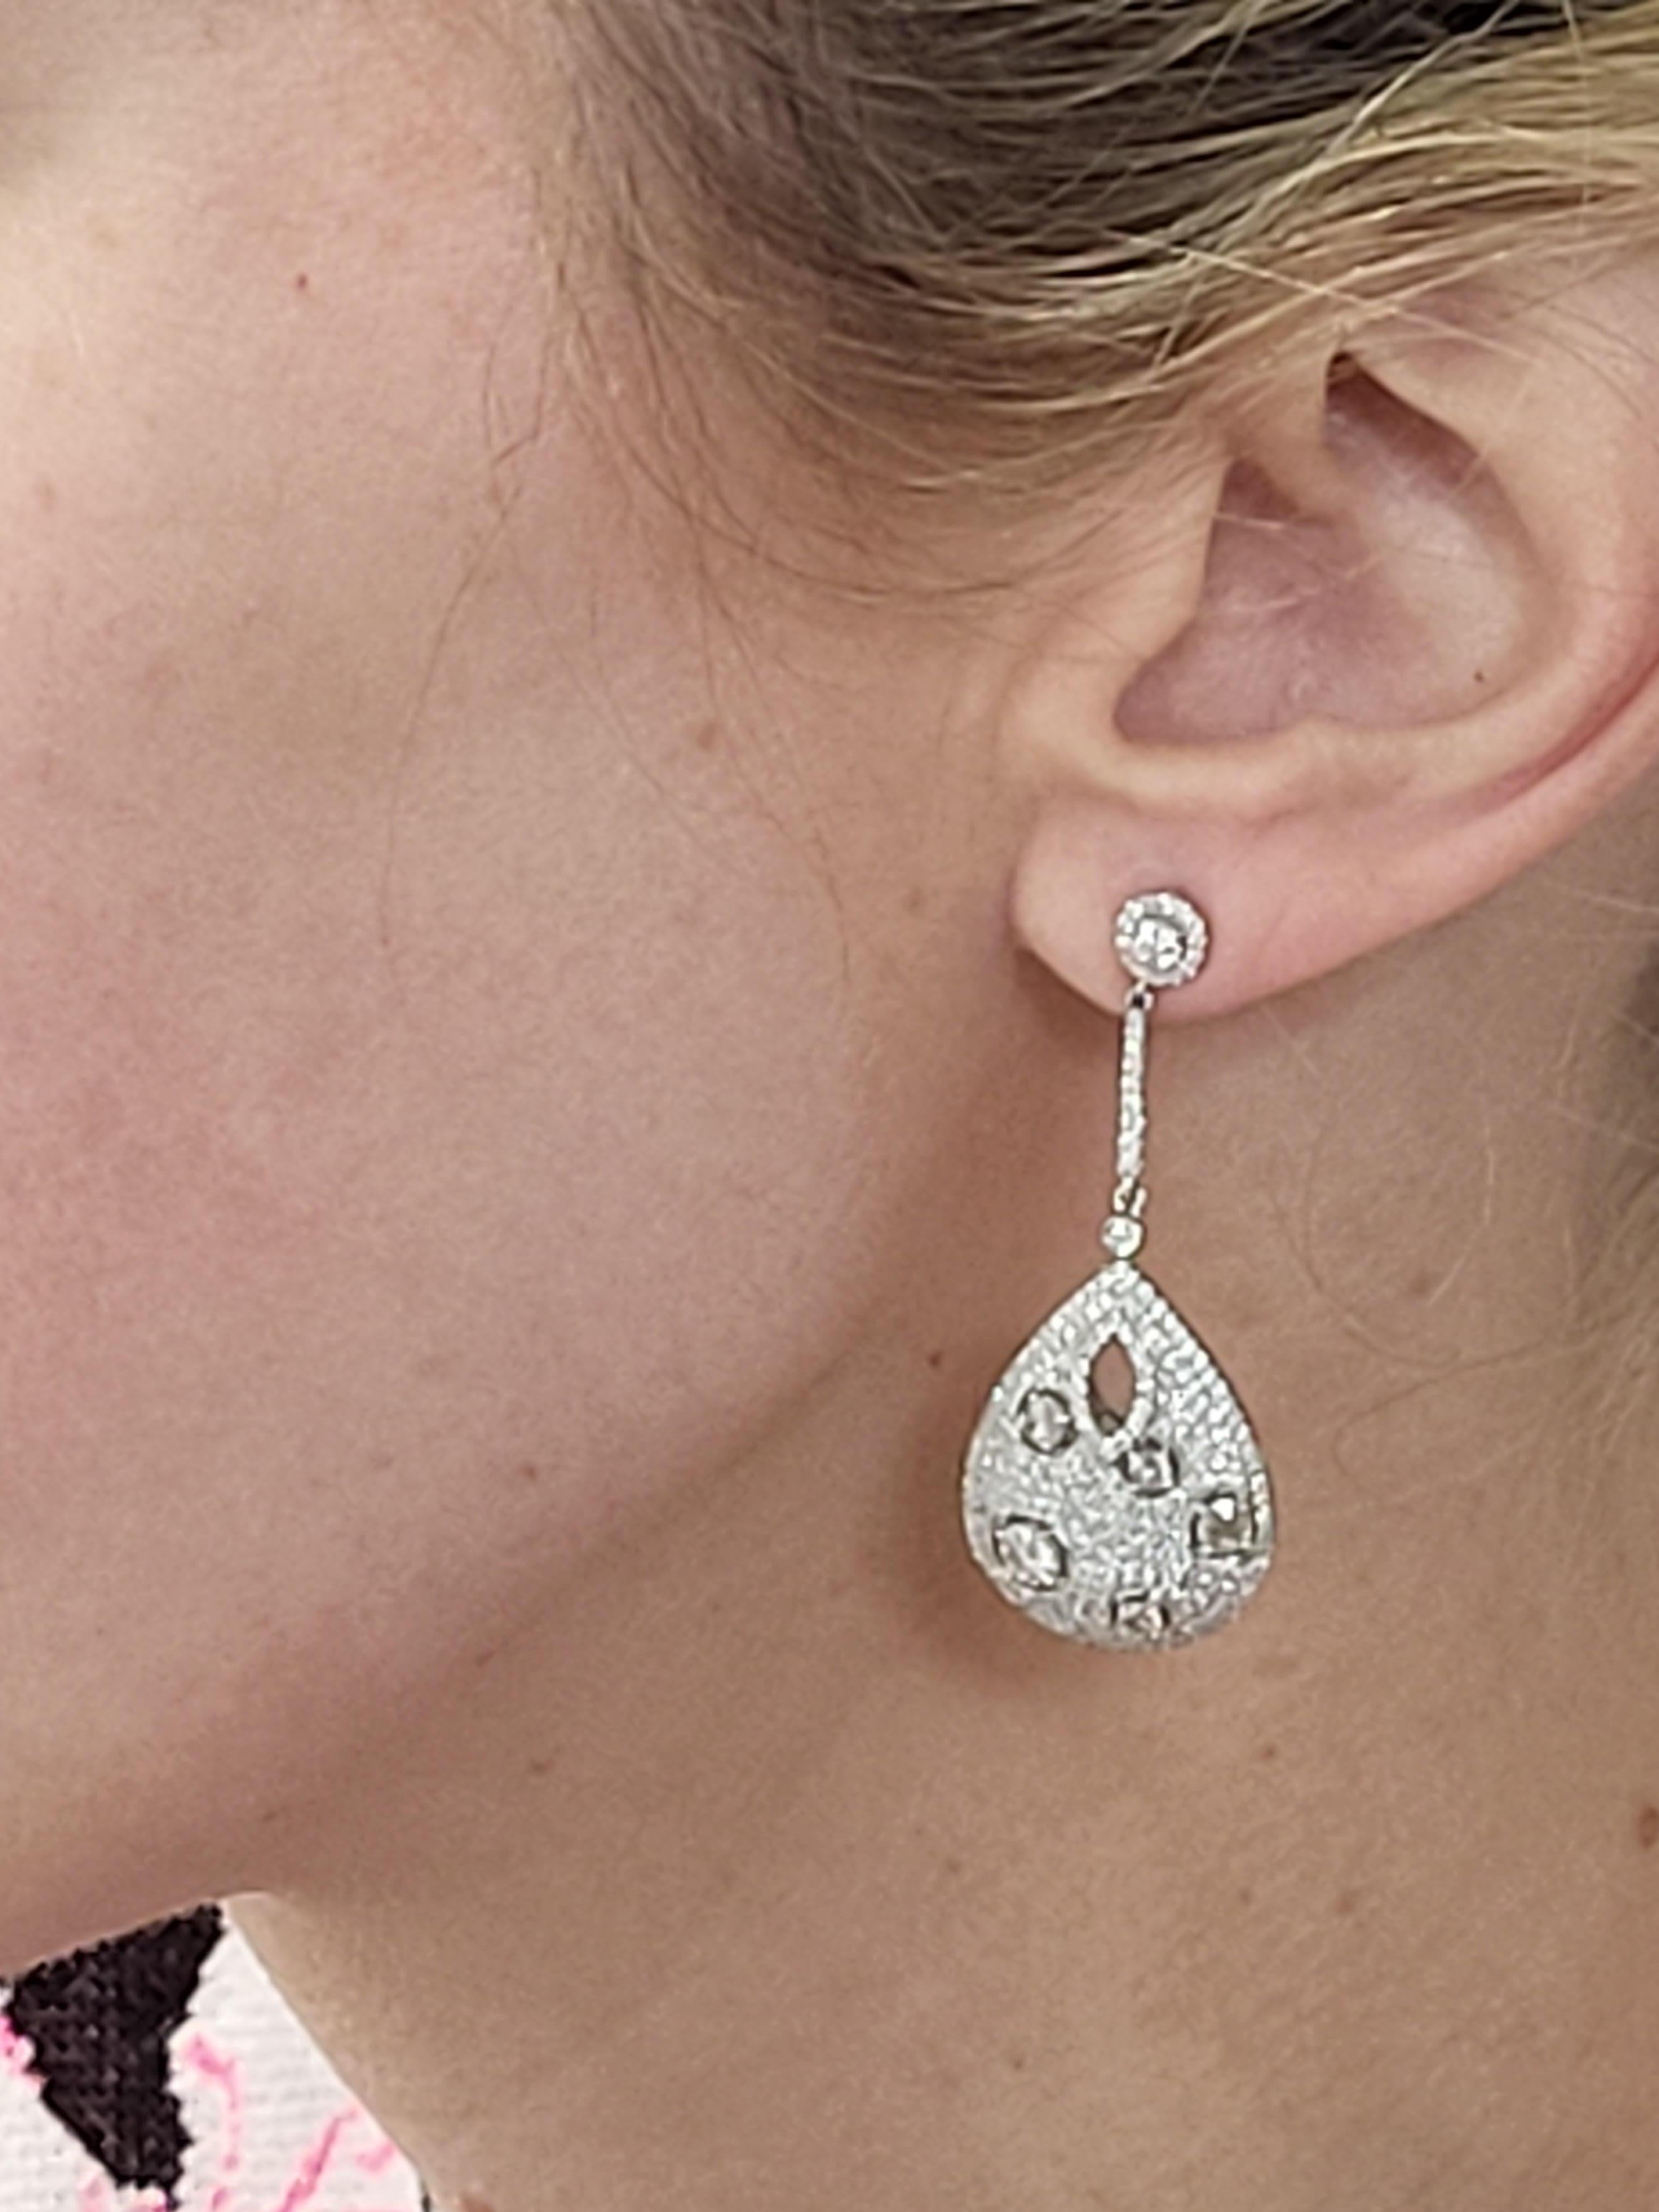 This unique dangle earrings feature 3.17 carat total weight in micro pave set diamonds & prong-set round brilliant and rose cut diamonds set in 18 karat white gold. Friction post with jumbo back. 
Measurements: Approximately 1.75